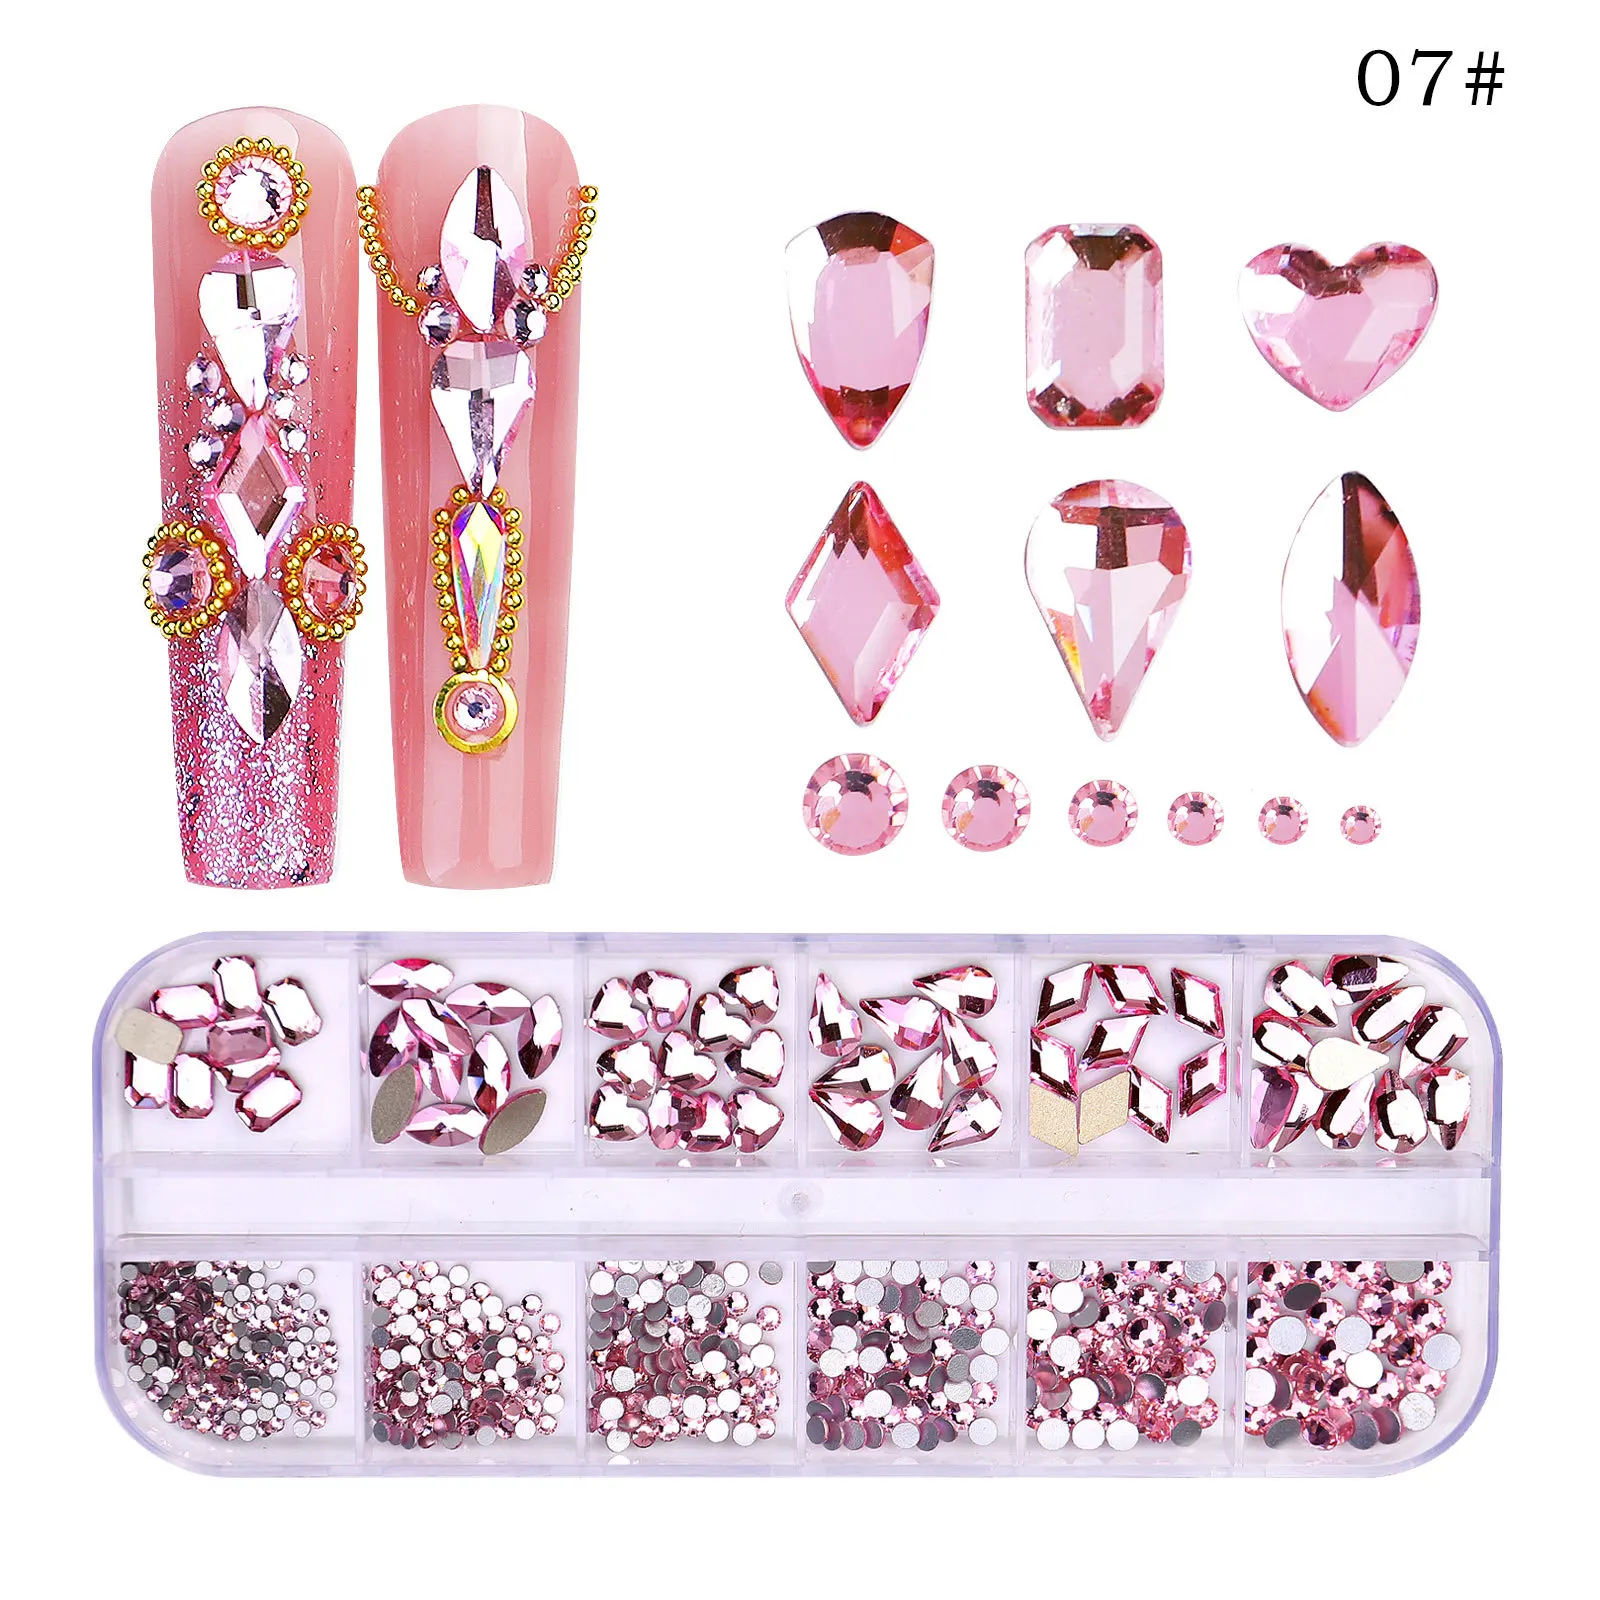 3d Nail Art Rhinestones Multi Color Nail Decorations Gold Red